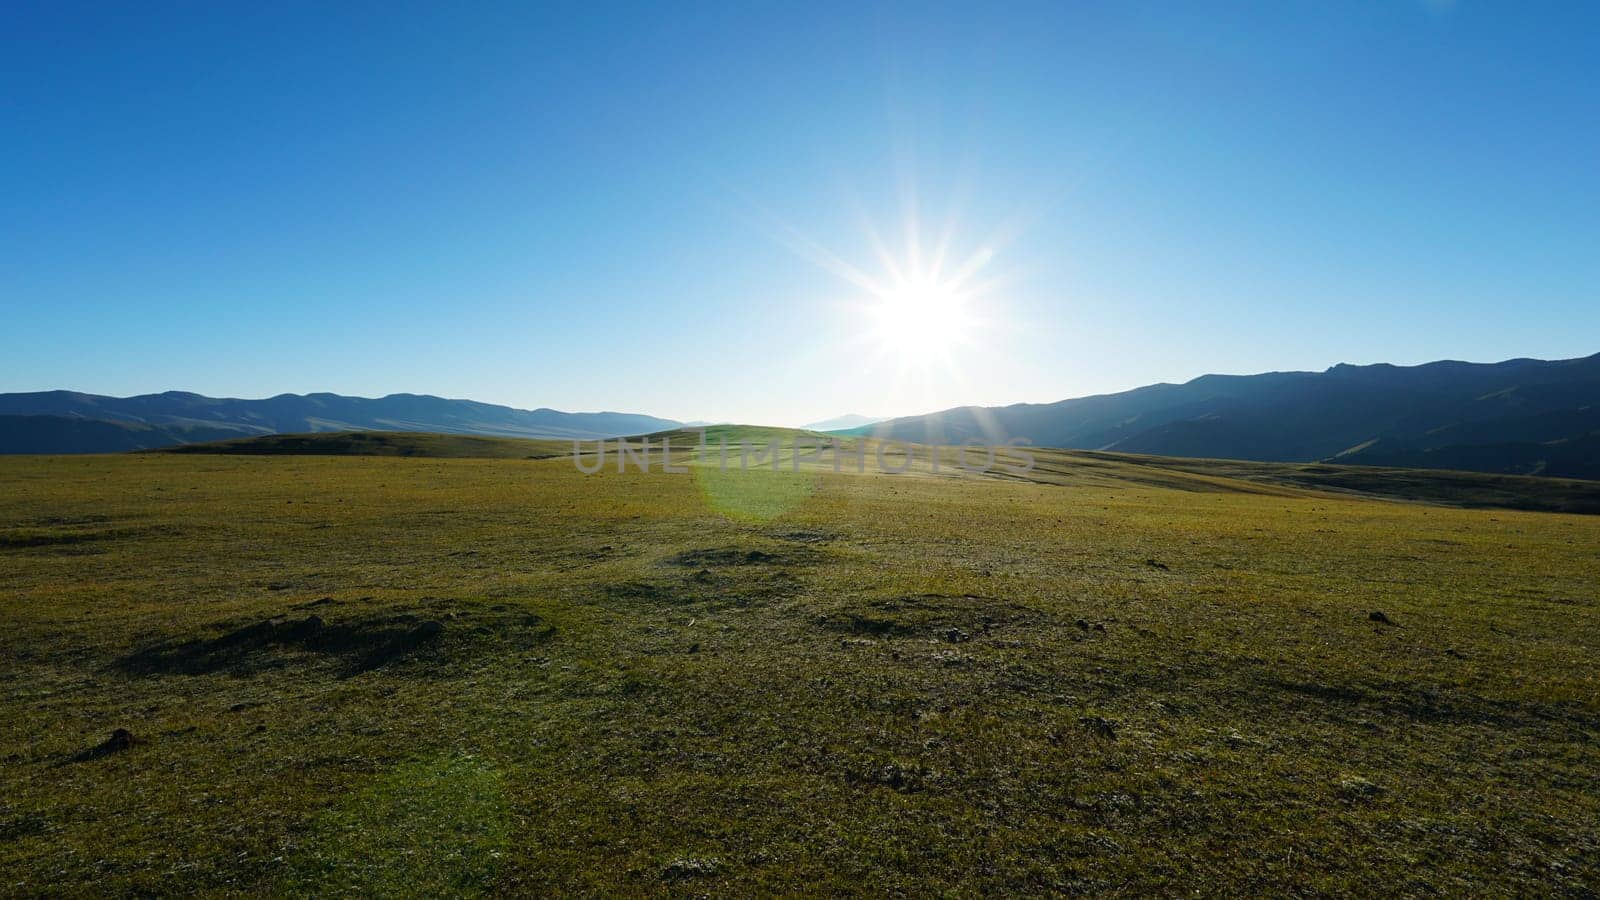 Sunrise with a view of green hills and snowy peaks. Spacious green fields and yellow grass in places. Blue clear sky. Shadows from mountains, gorges. Peace and relaxation. Outdoor recreation